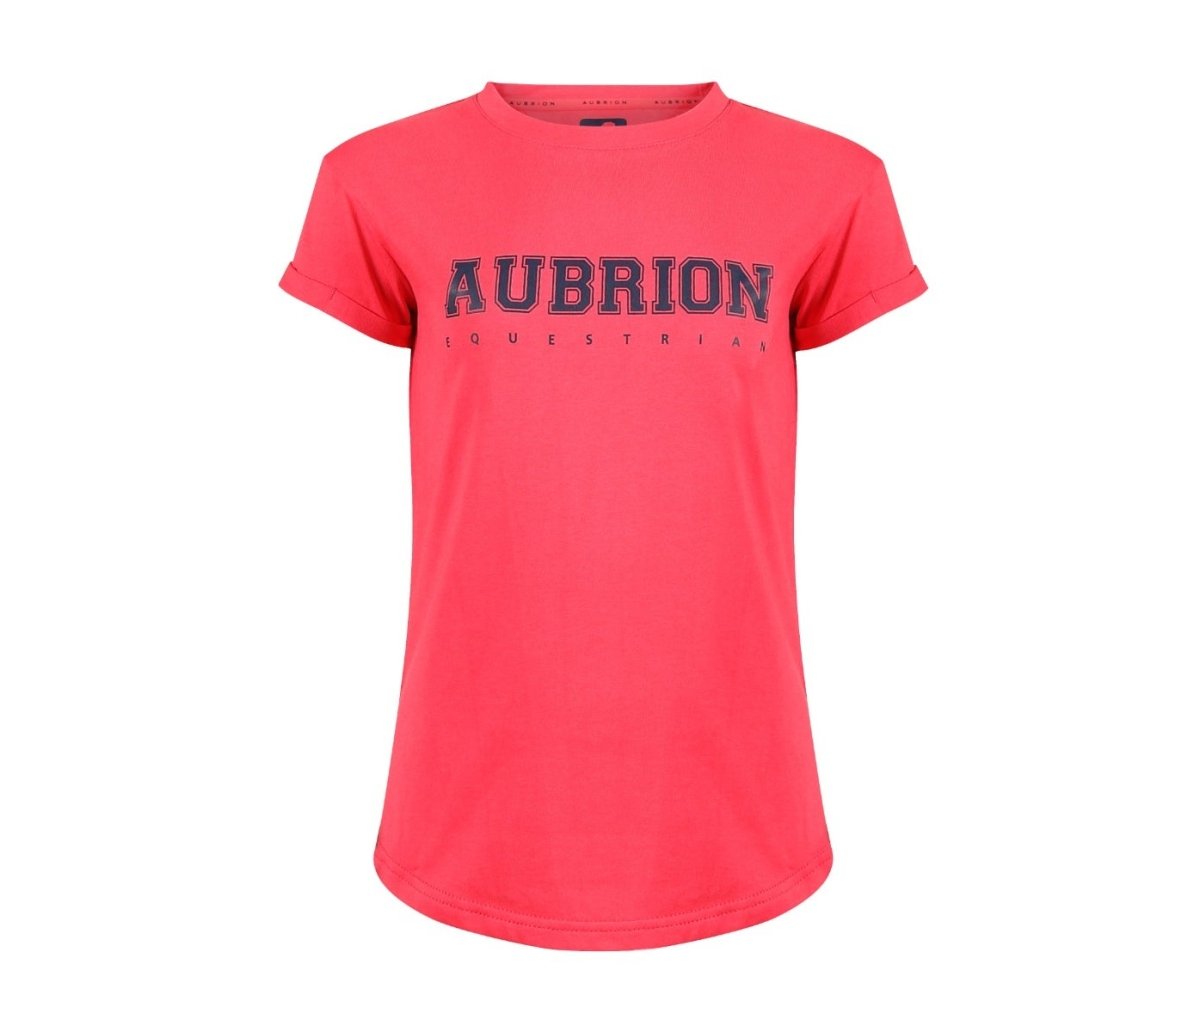 Aubrion SS24 Repose T-Shirt - Young Rider - Coral - 11/12 Years